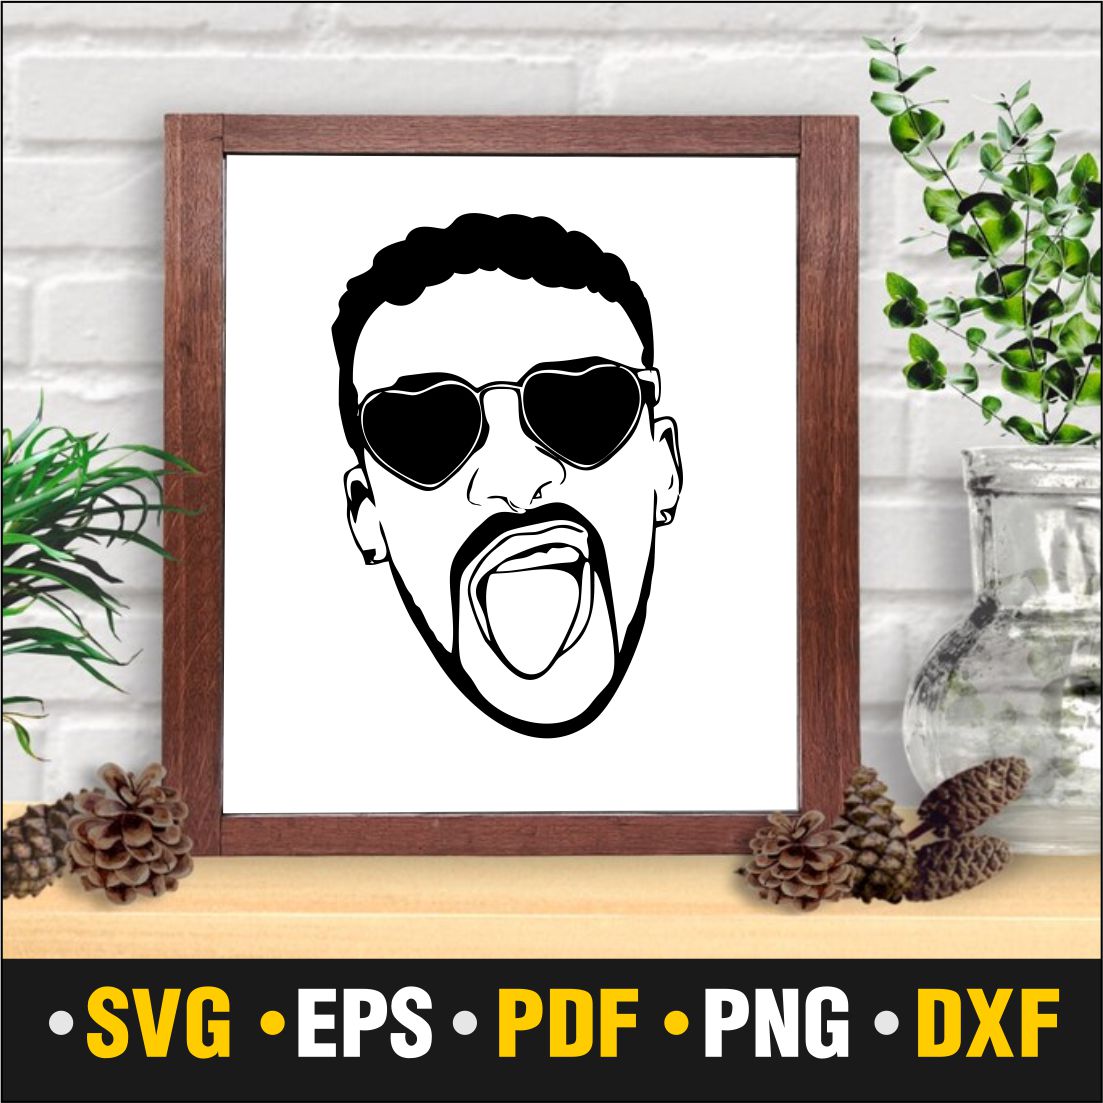 Bad Bunny SVG, PDF, PNG, DXF, EPS cover image.